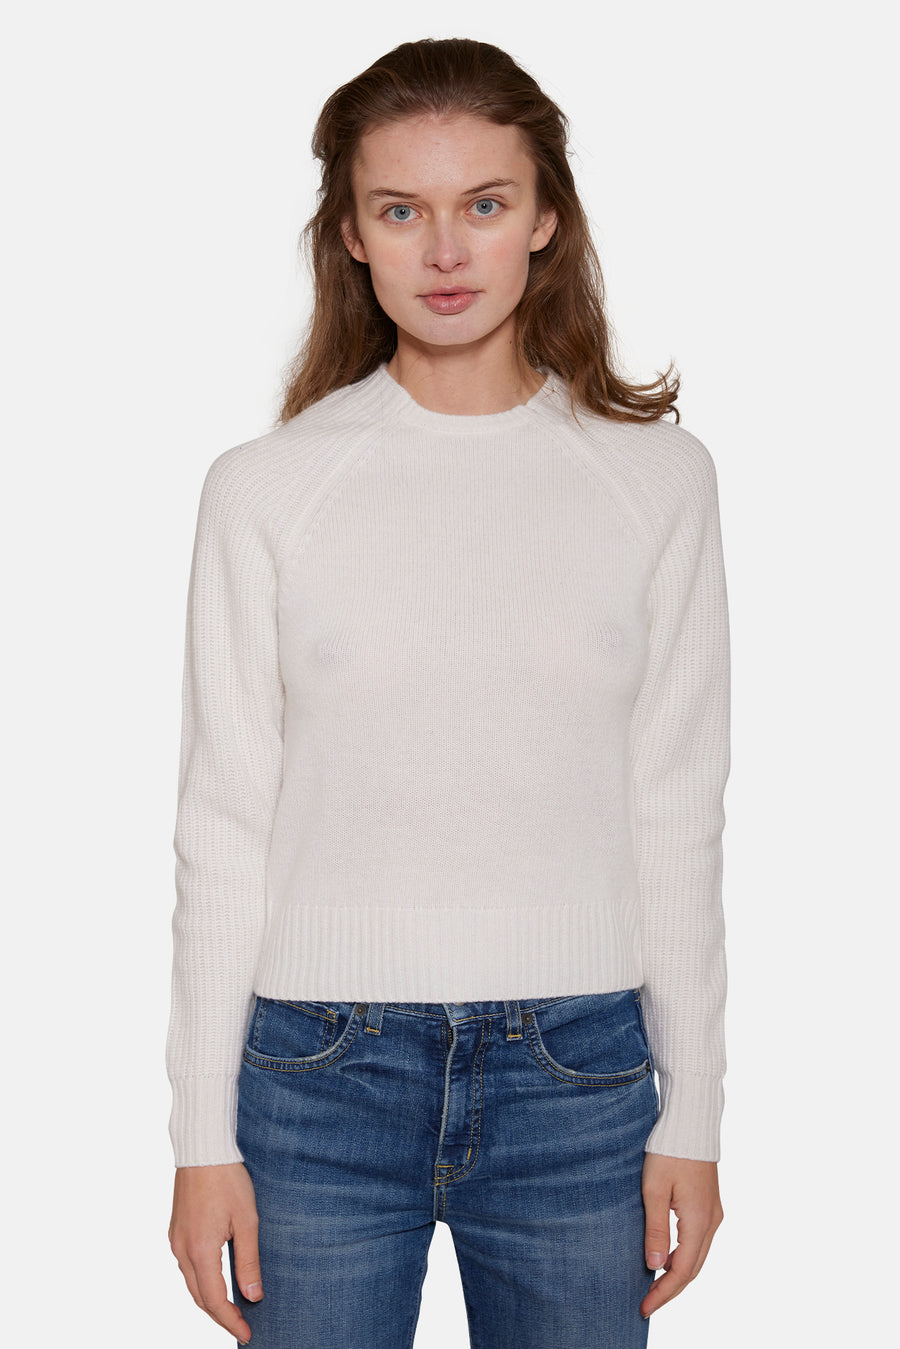 Cropped Crew Sweater White